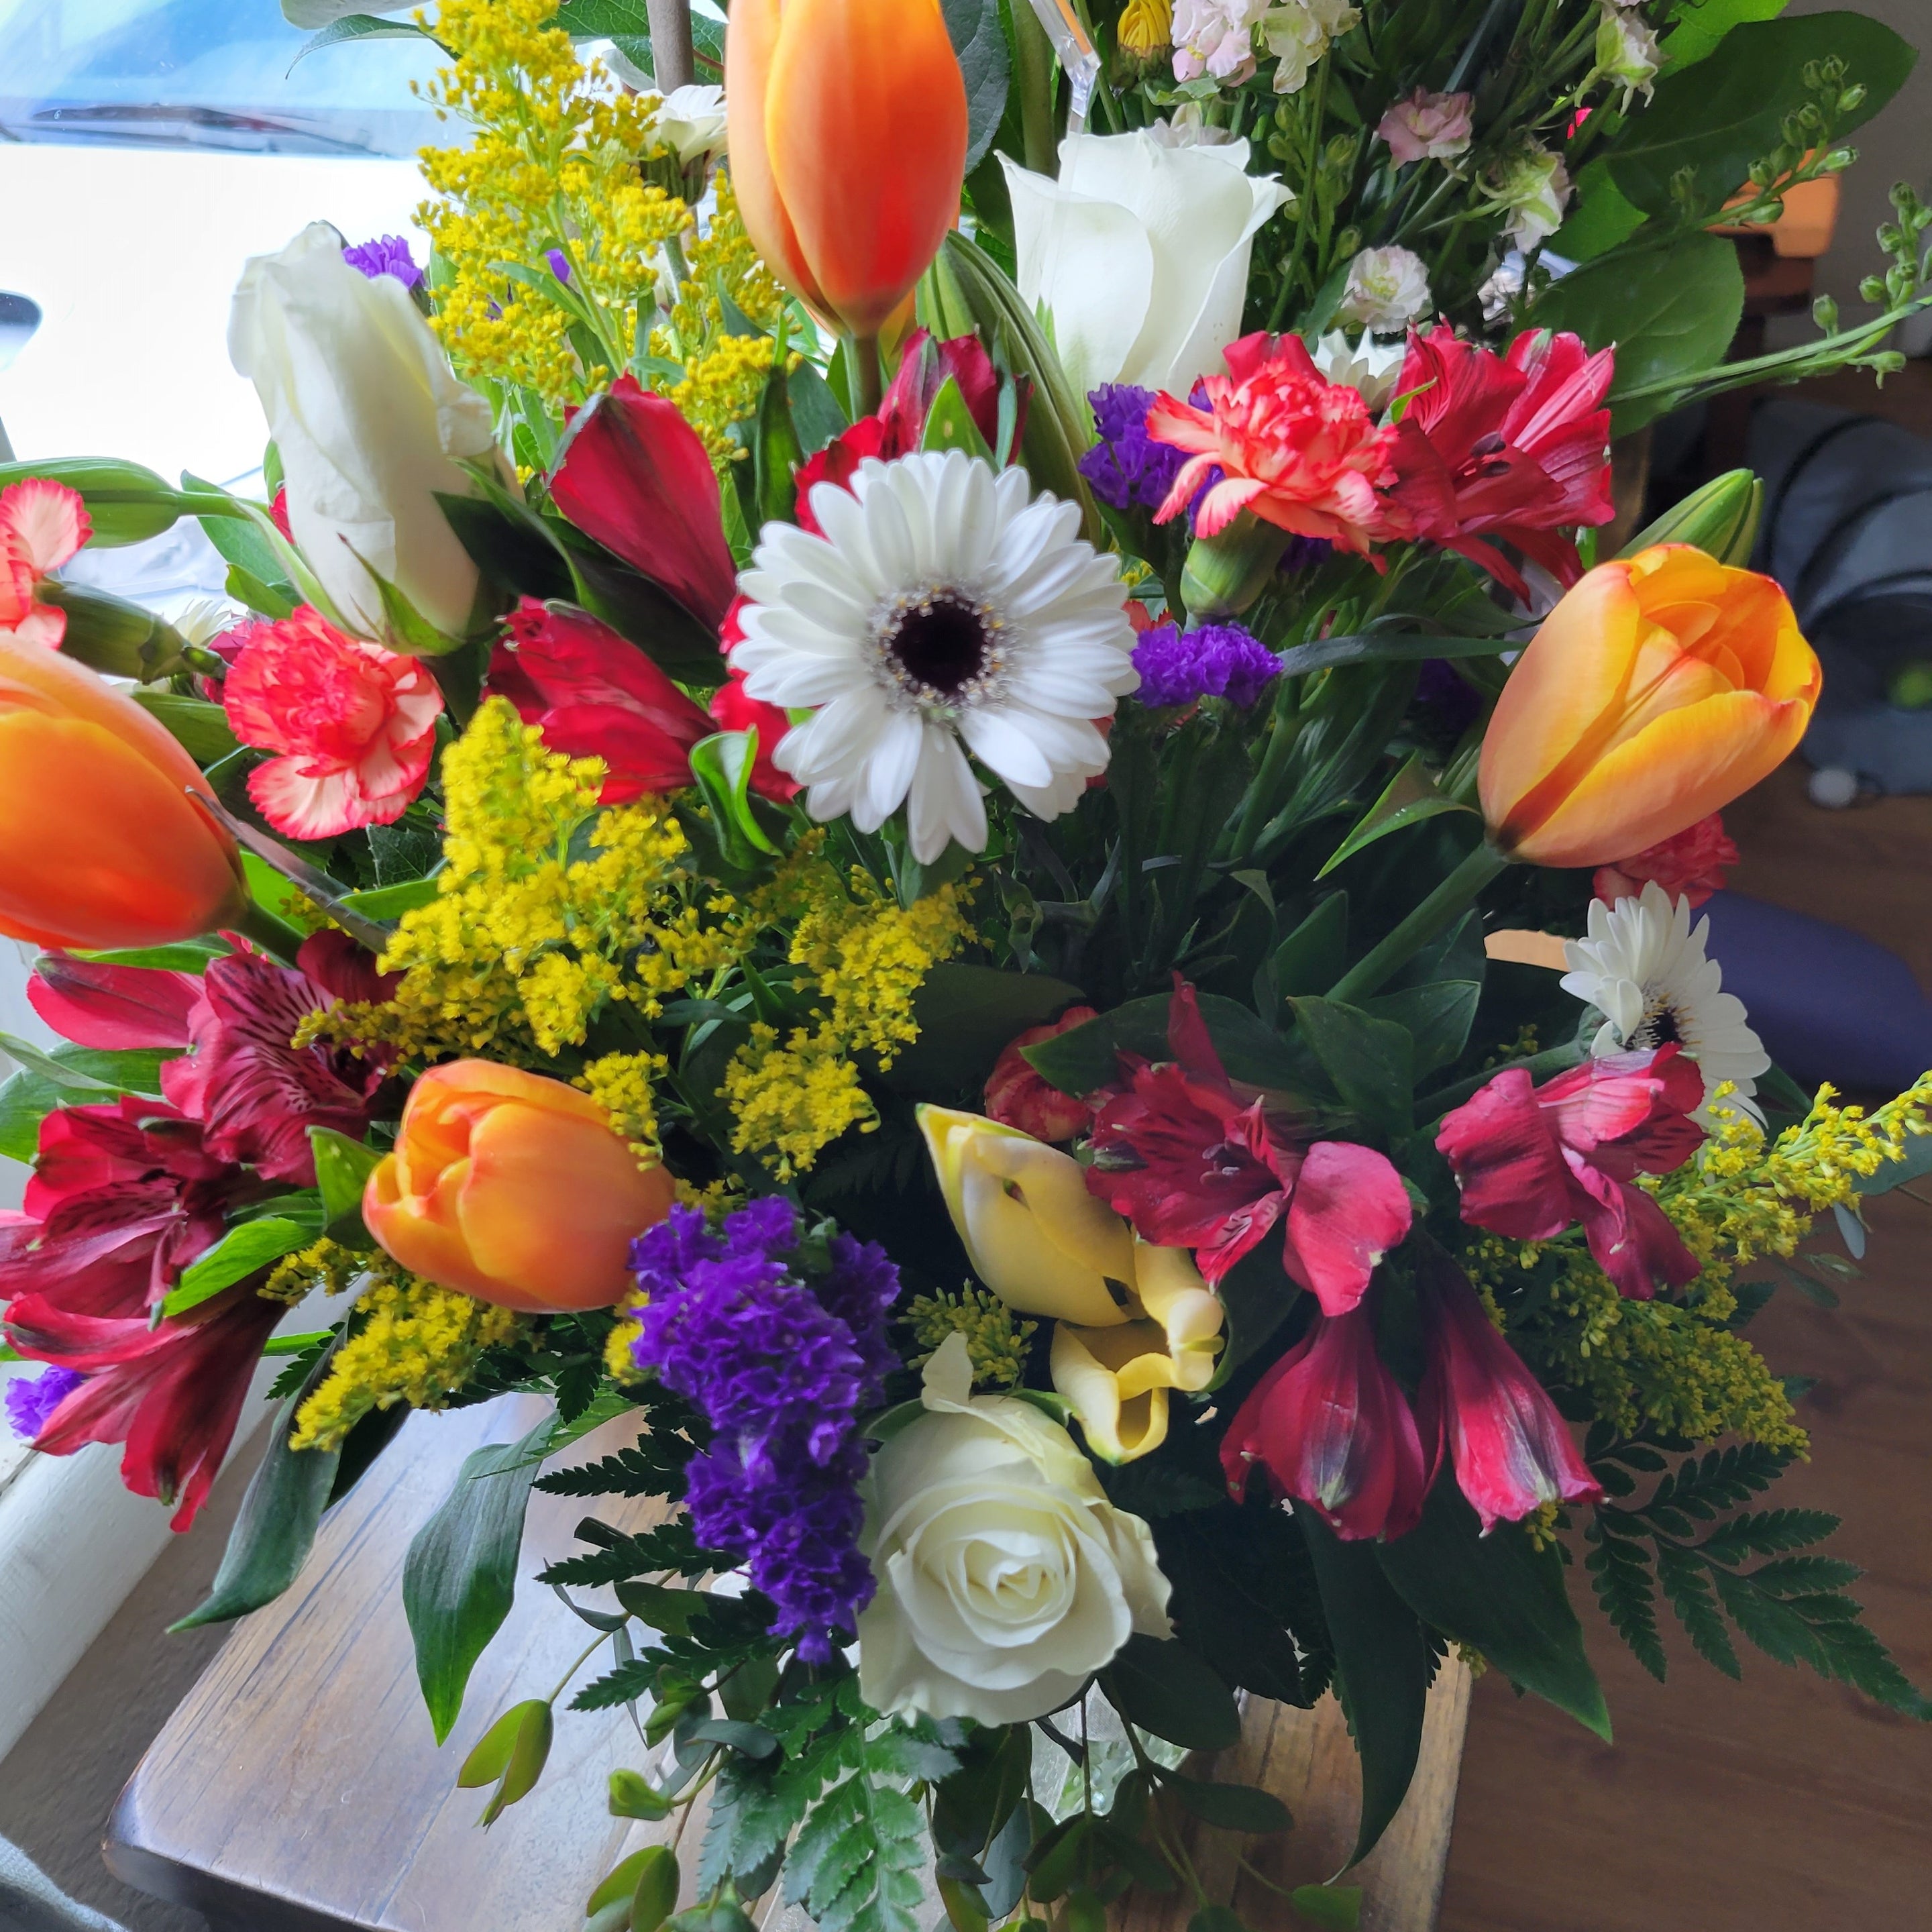 Gracious photo contribution from the recipient for Florist's Choice Daily Deal